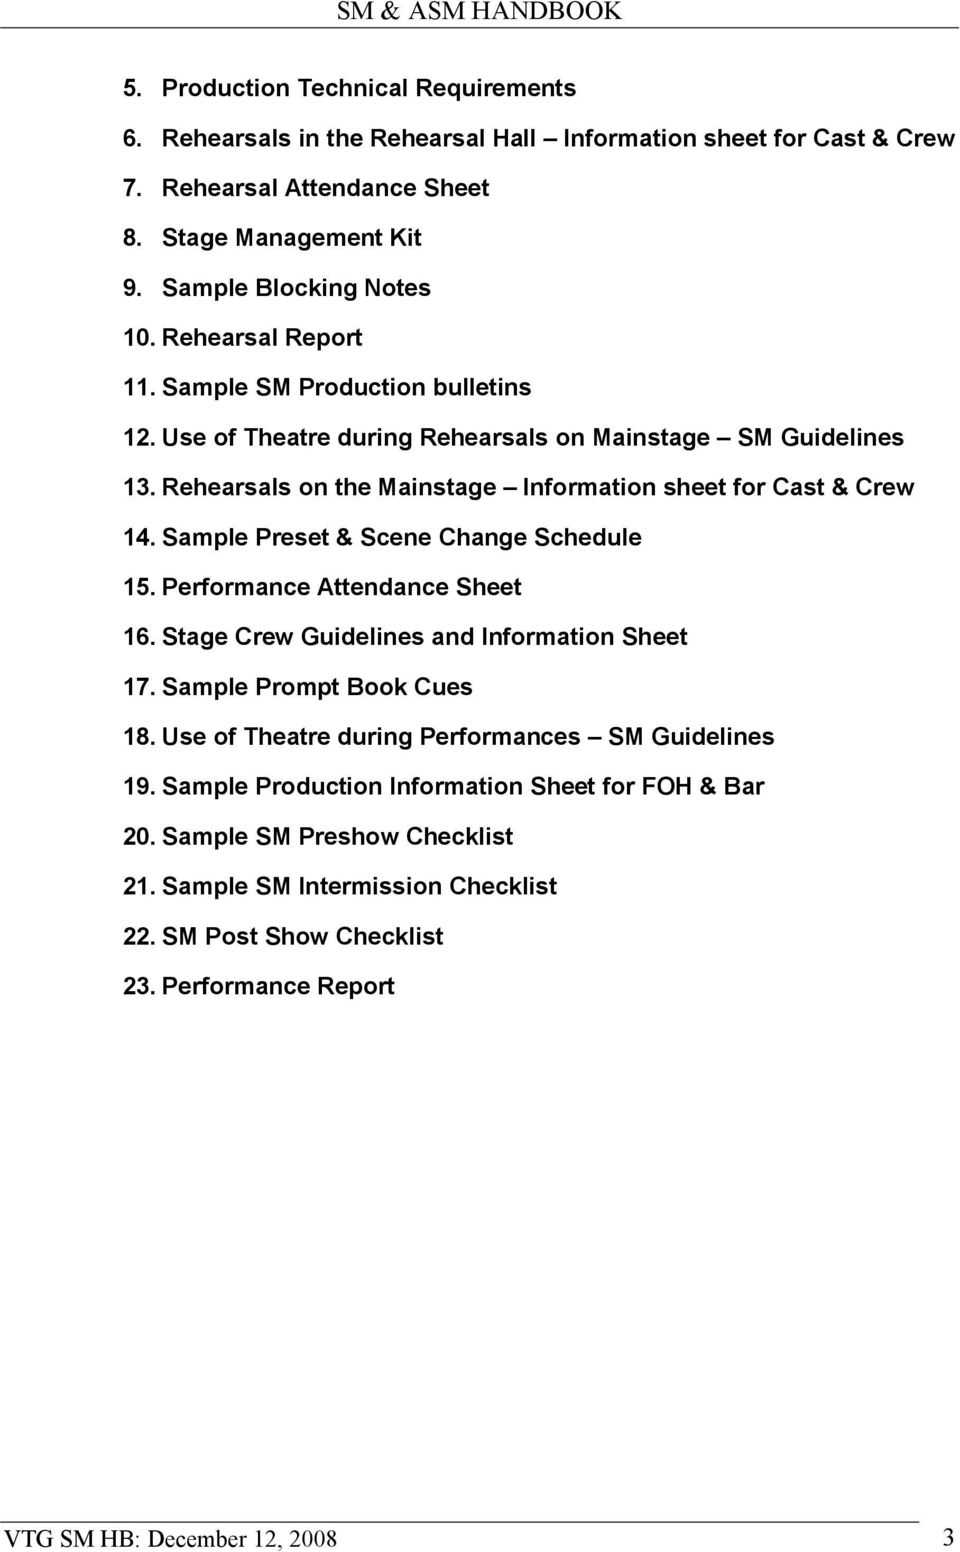 Stage Manager & Assistant Stage Manager Handbook – Pdf Free Intended For Rehearsal Report Template